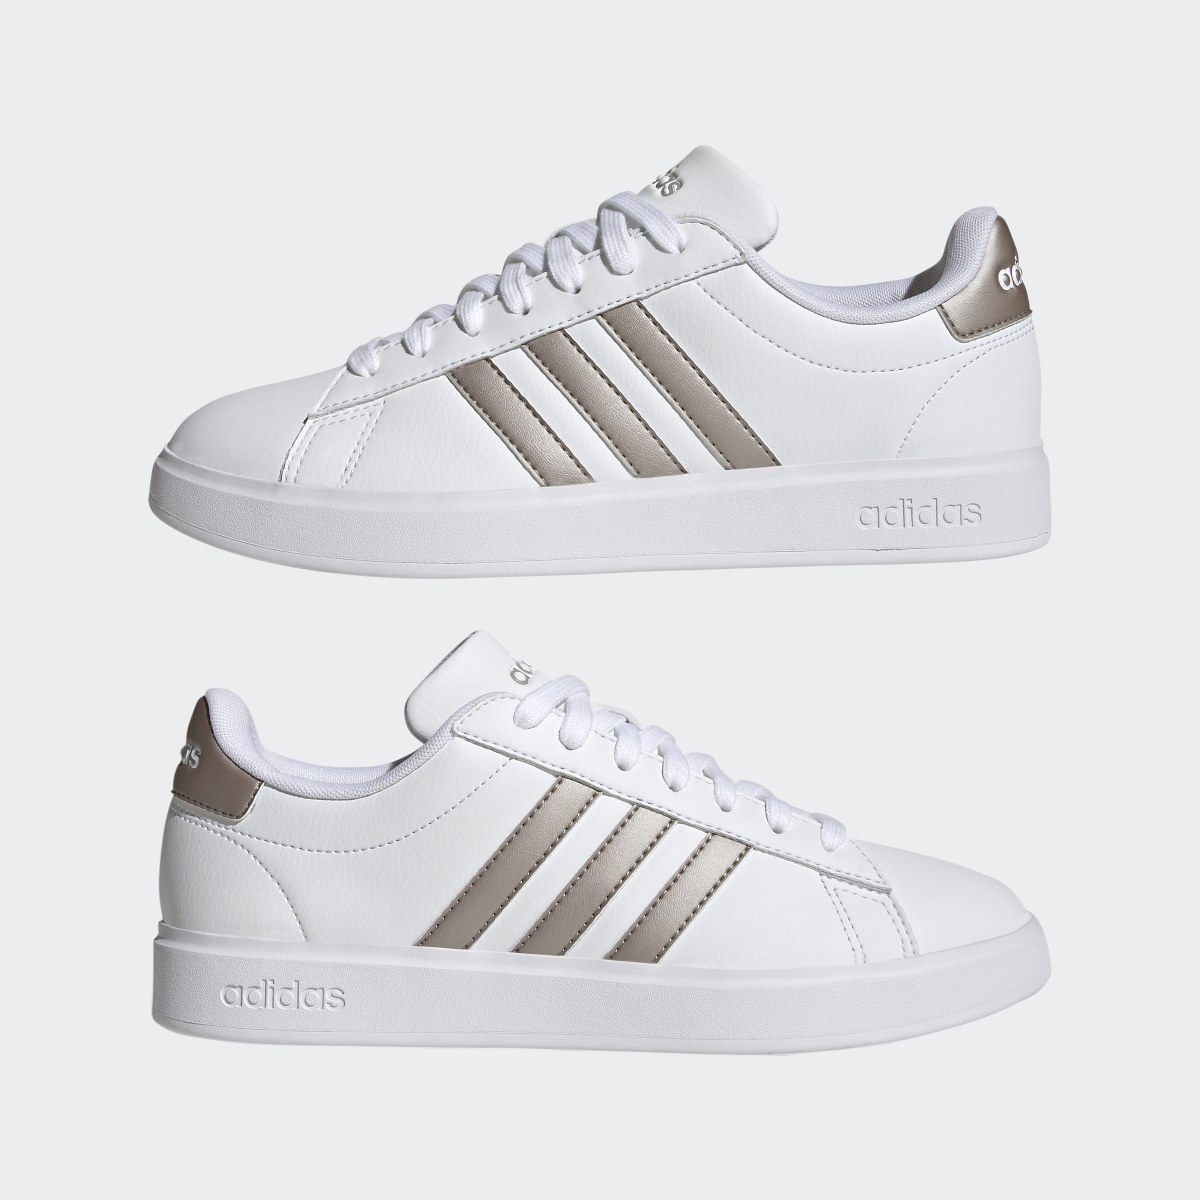 Adidas Grand Court Shoes. 8